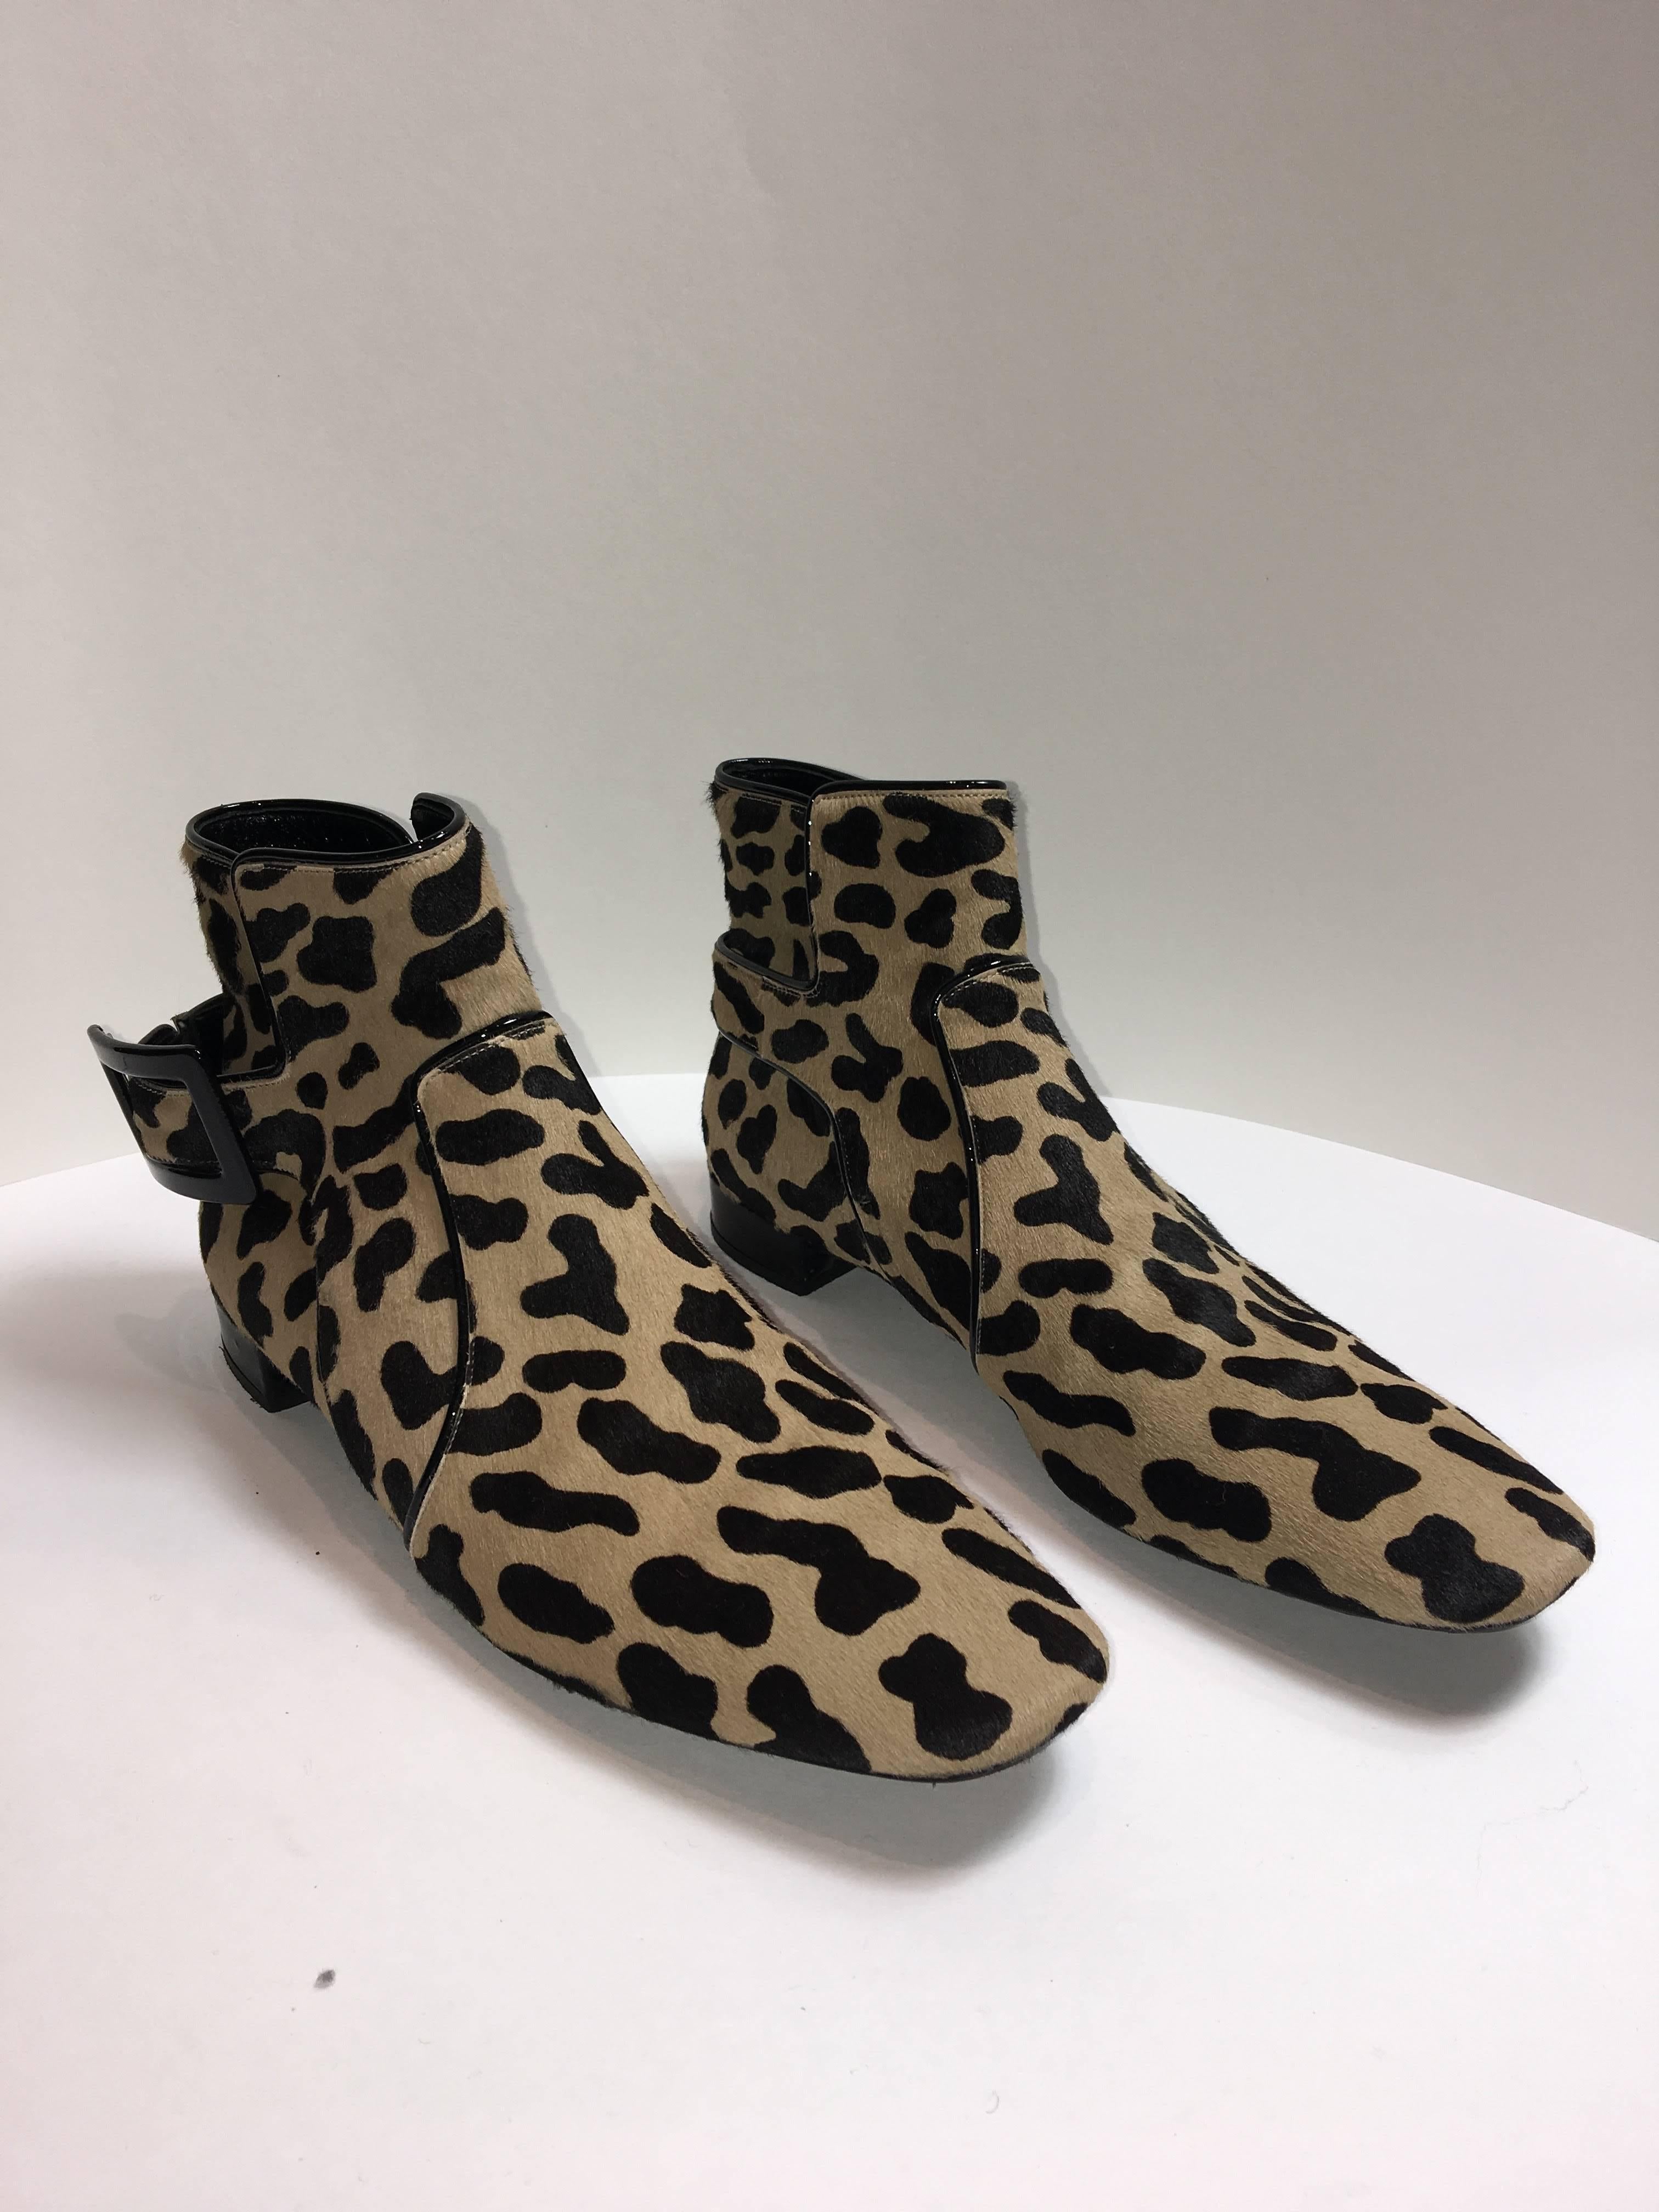 Roger Vivier Leather Booties with leopard print and side buckle made of Calf hair. 